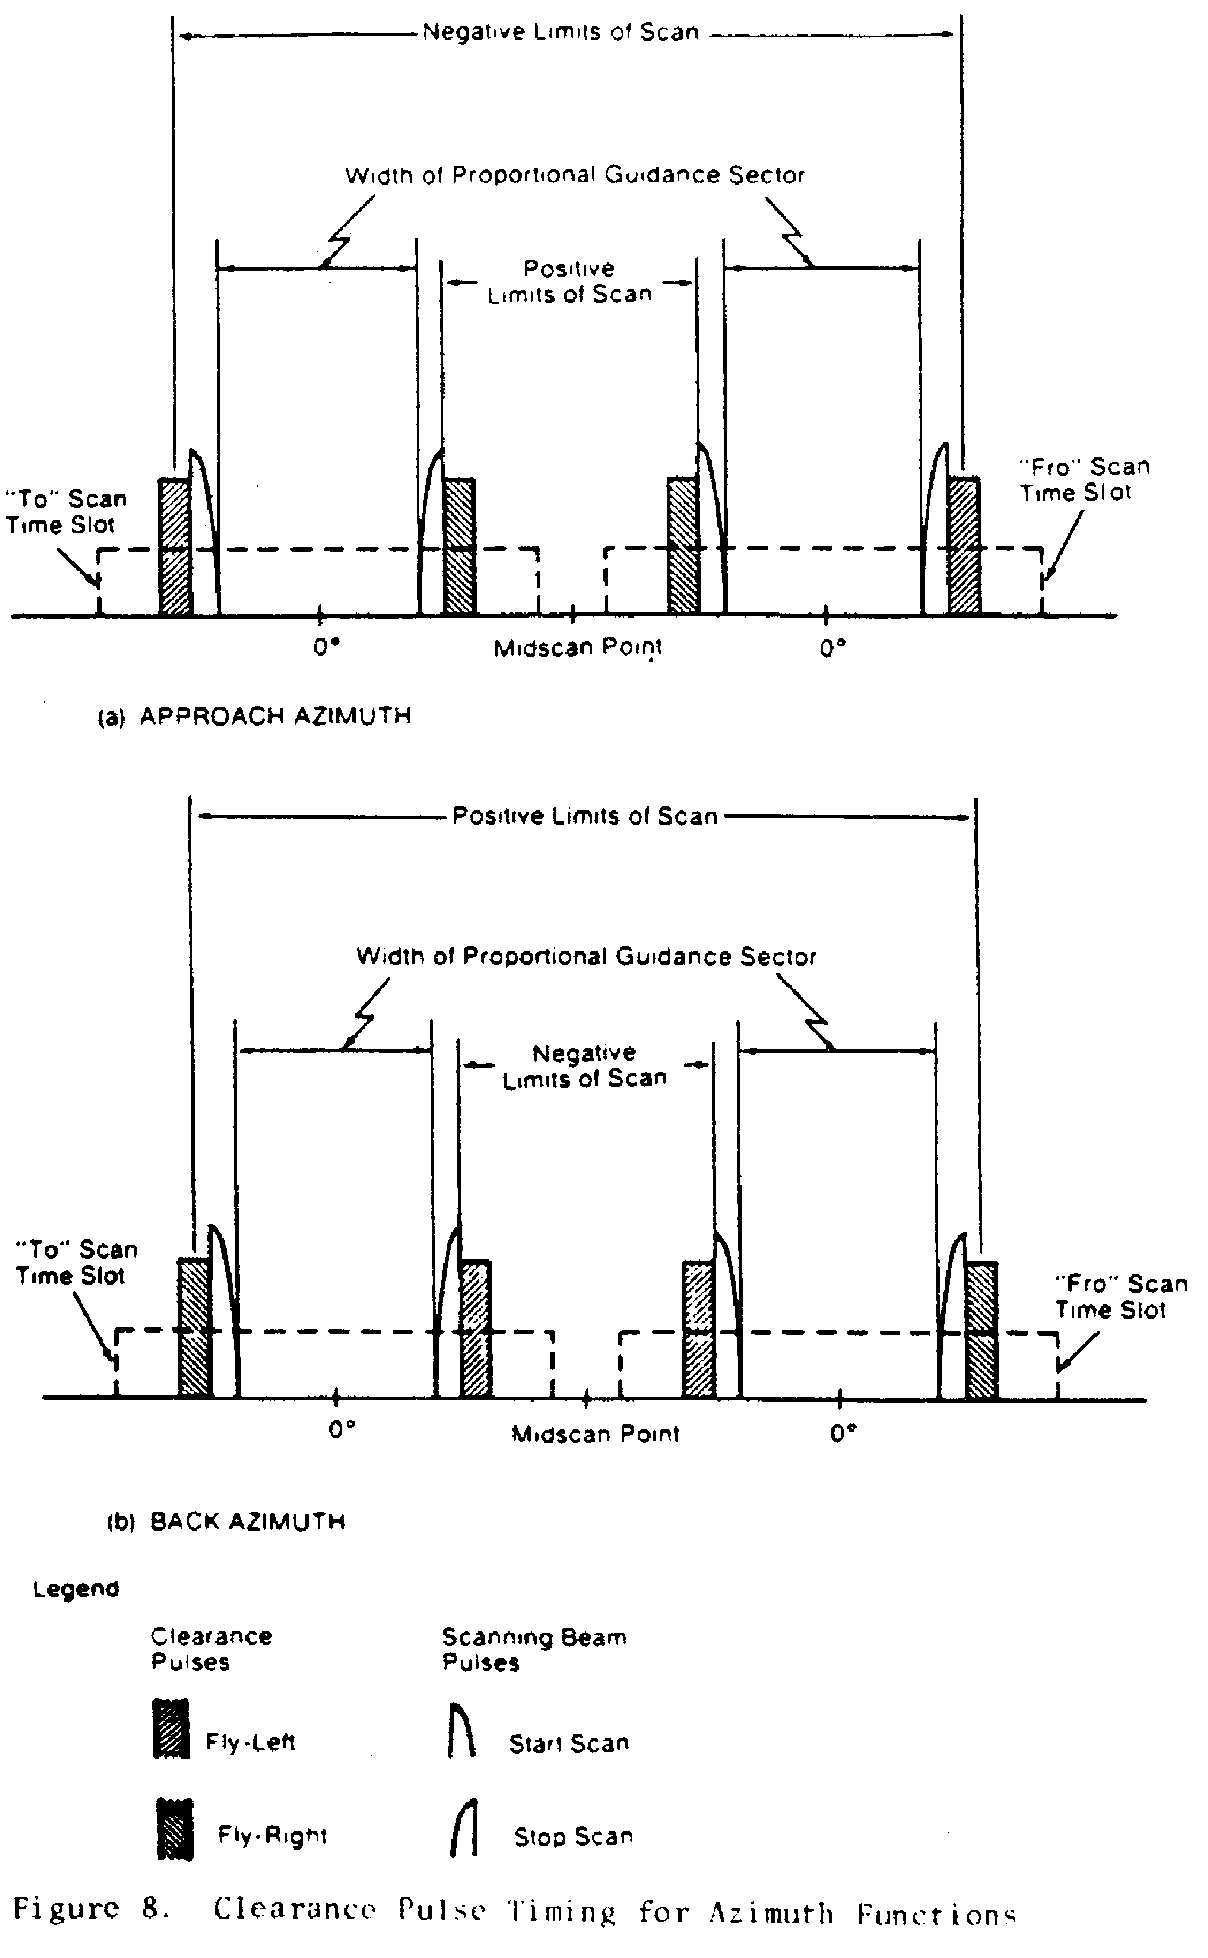 Graphic of (3) Clearance signal type shall represent the type of clearance when used. Pulse clearance is that which is in accordance with § 171.311 (i) (2) (iv). Scanning Beam (SB) clearance indicates that the proportional guidance sector is limited by the proportional coverage limits set in basic data.